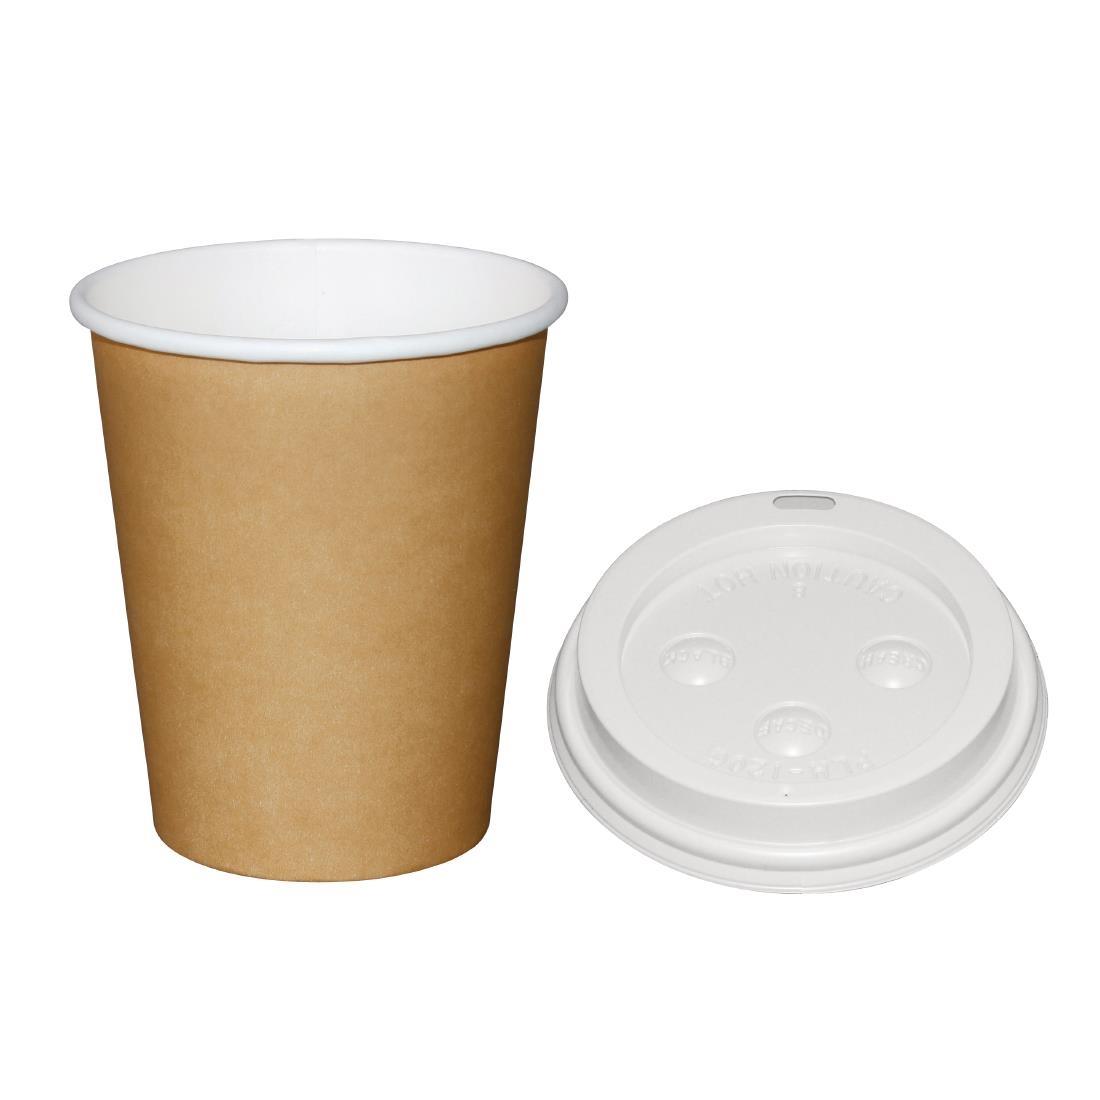 Special Offer Fiesta Brown 225ml Hot Cups and White Lids (Pack of 1000) - SA434  - 1